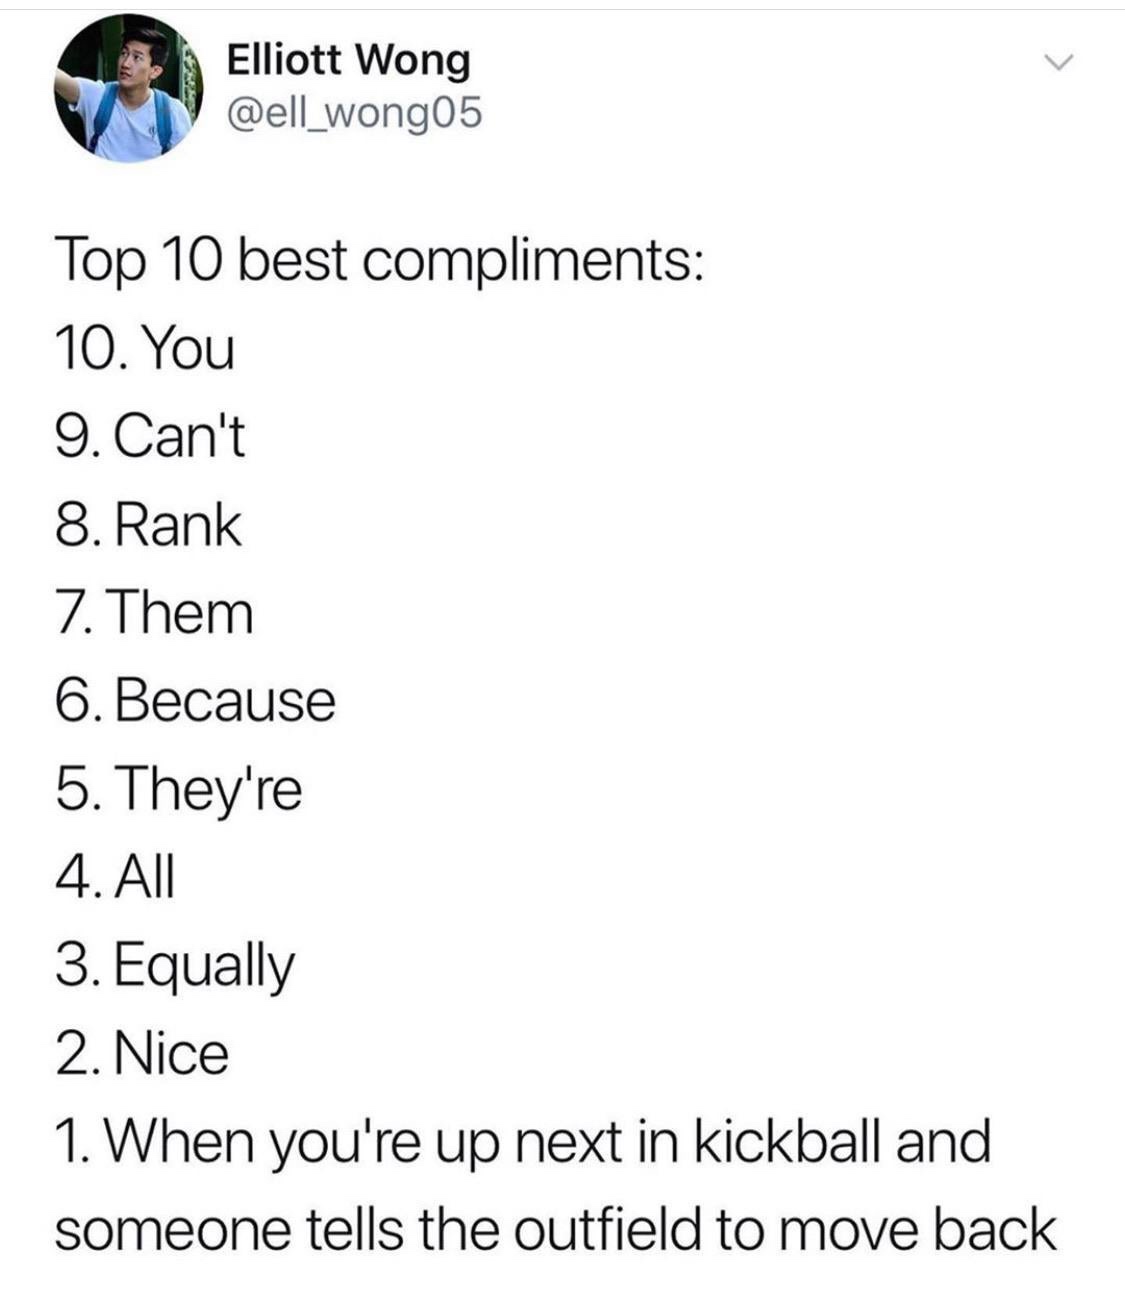 angle - Elliott Wong Top 10 best compliments 10. You 9. Can't 8. Rank 7. Them 6. Because 5. They're 4. All 3. Equally 2. Nice 1. When you're up next in kickball and someone tells the outfield to move back